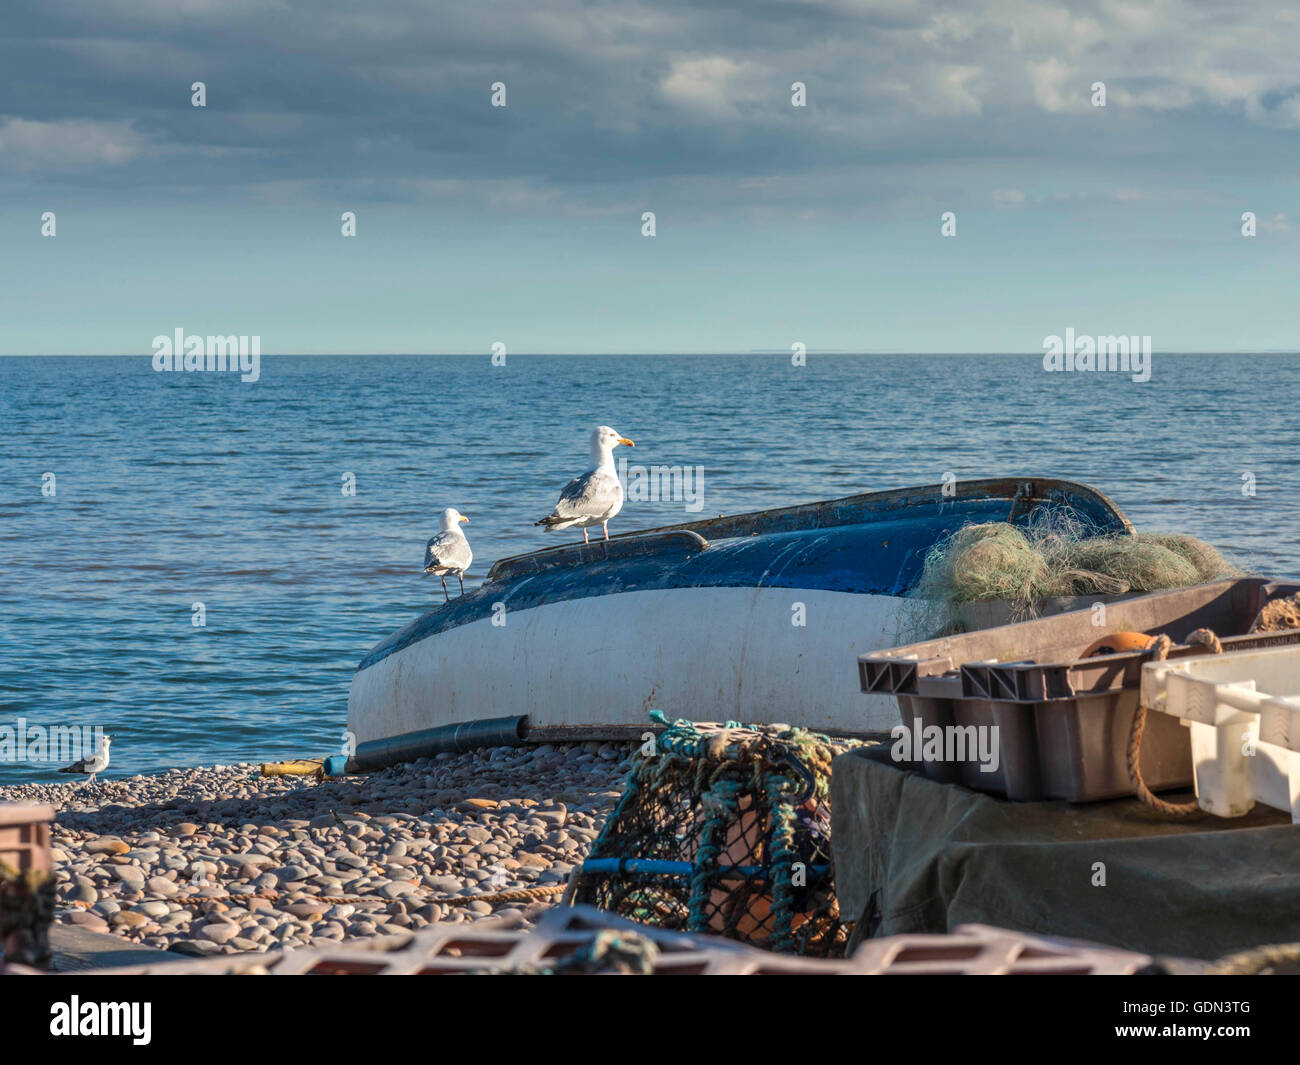 Seaside summer scene, depicting a blue ocean background with boat & seagulls in the mid-ground and a pebble beach foreground. Stock Photo